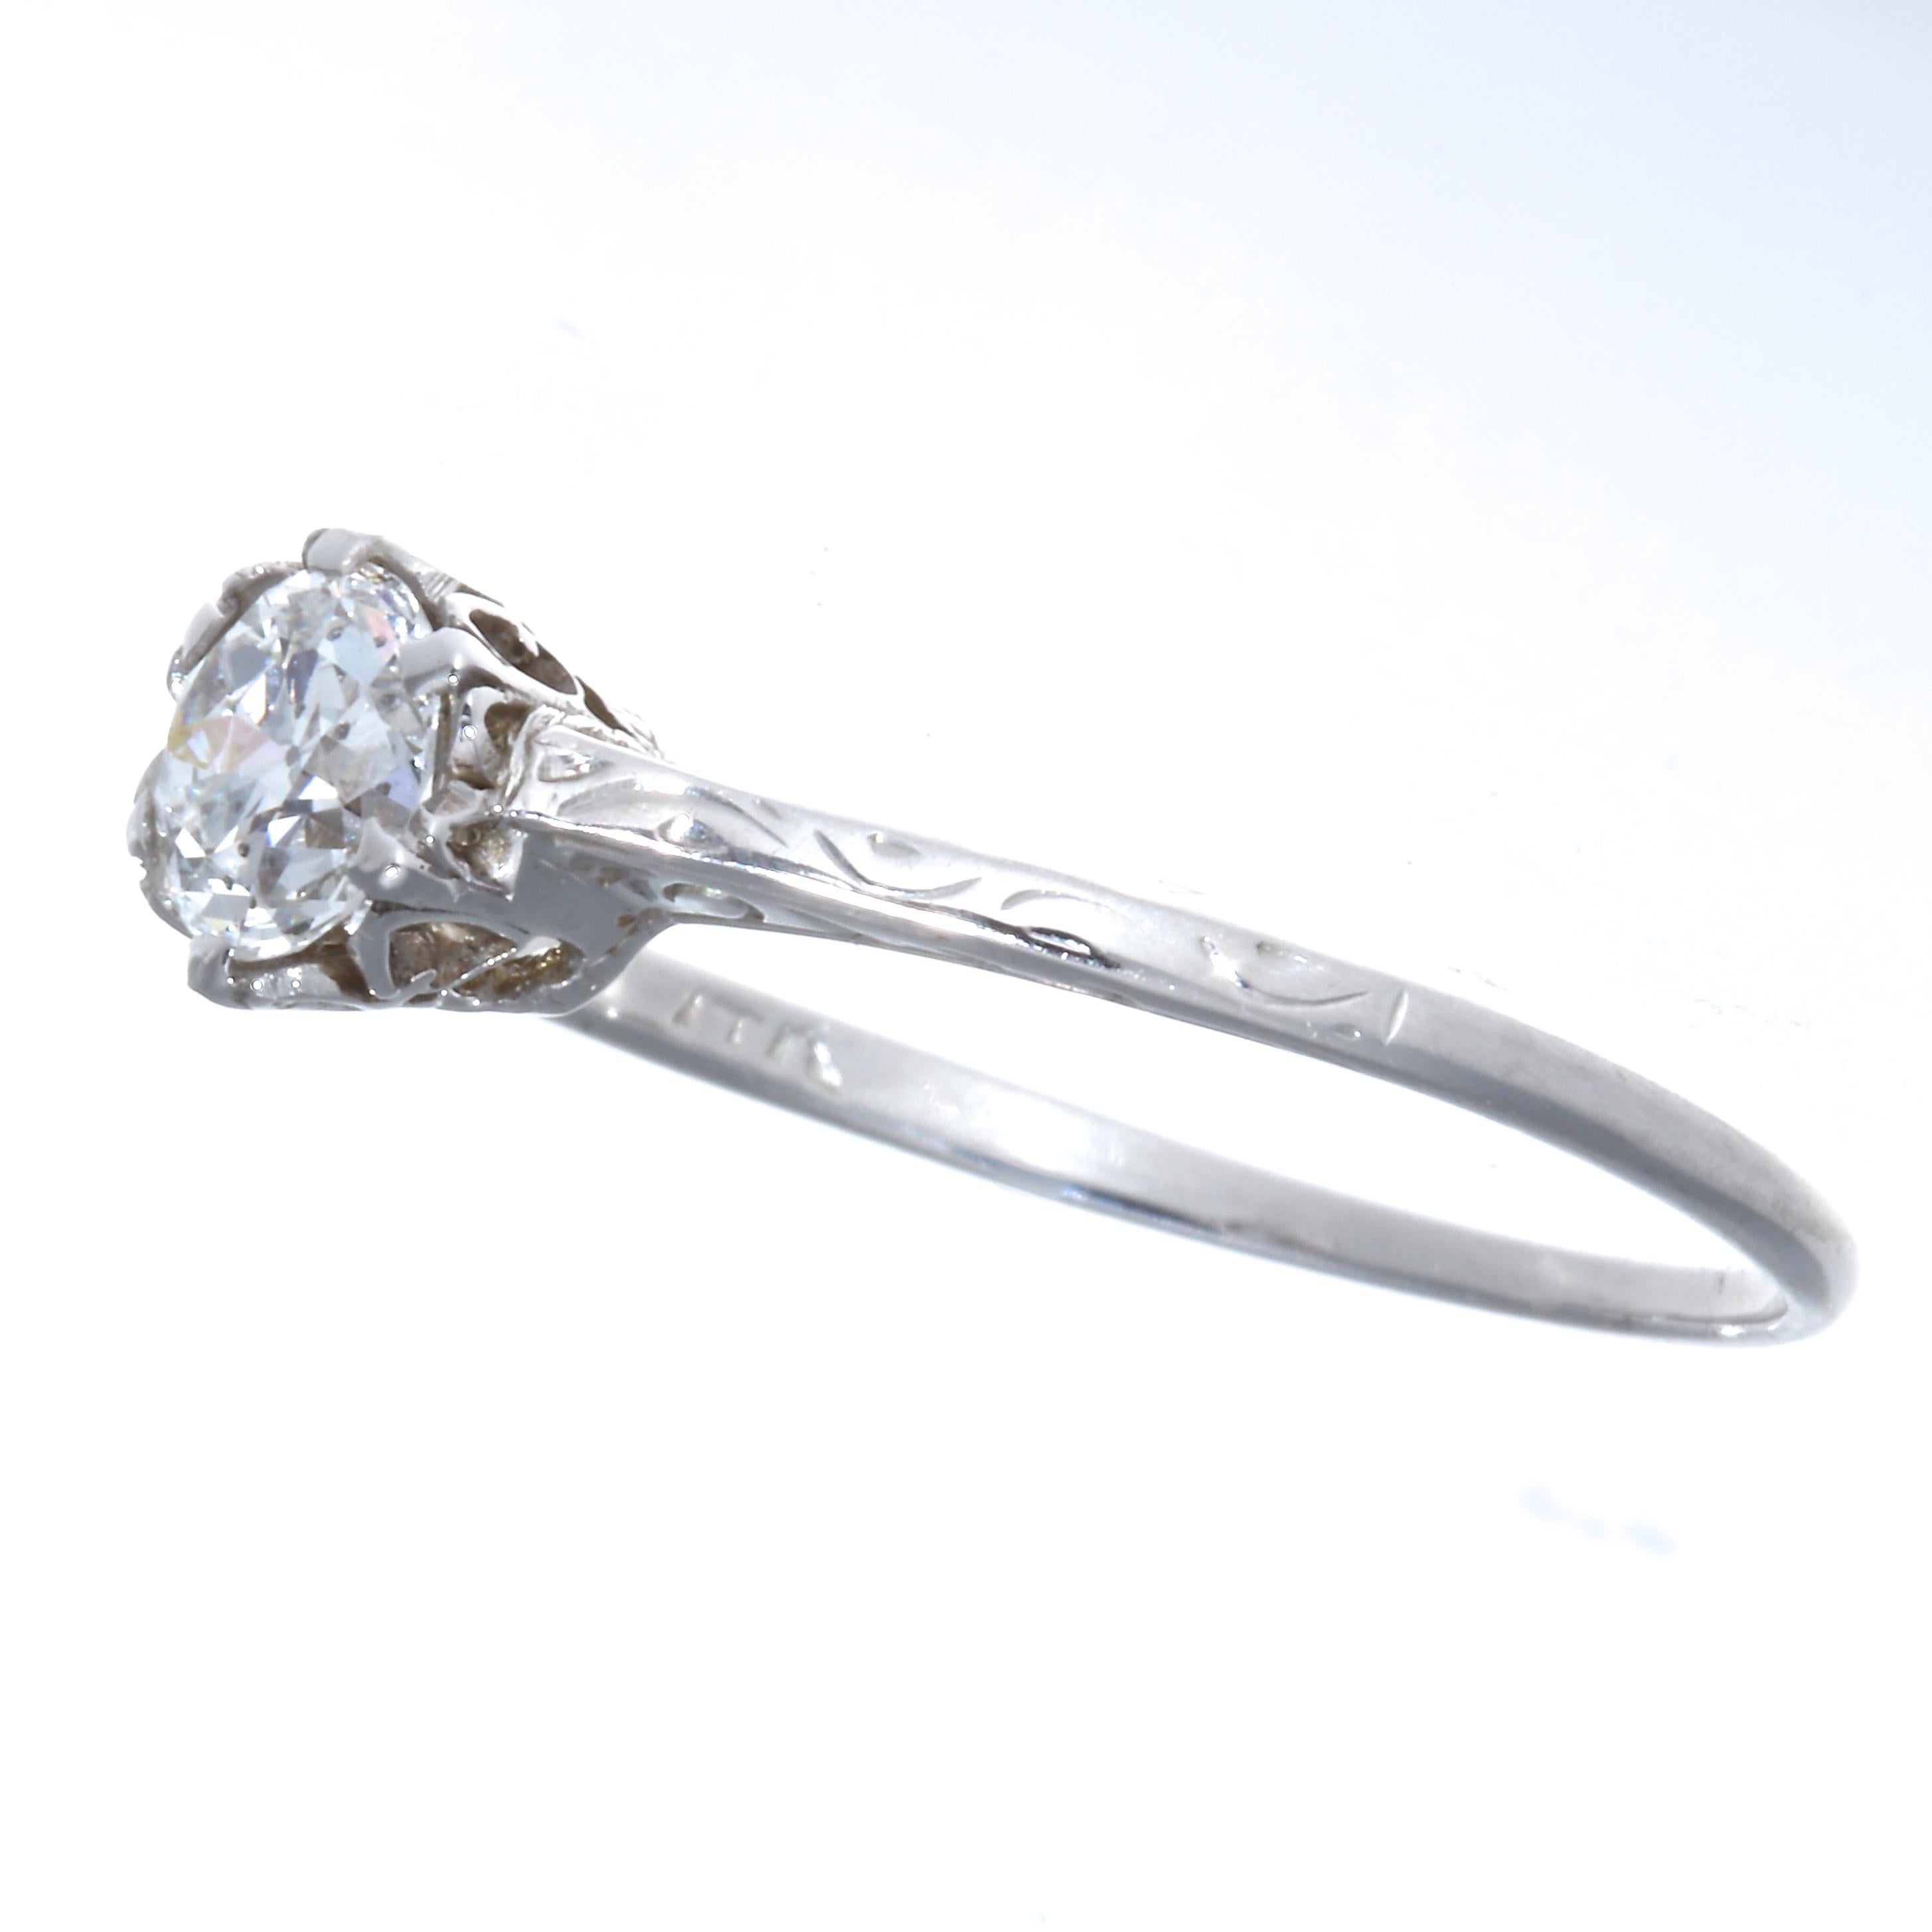 This sweet art deco creation  features a worthy diamond weighing approximately 0.50 carats graded as F,G color, VVS2 clarity. The finely filigreed ring is in platinum, size 8 1/2 and may be re-sized to fit. Circa 1920's. 
Flawless Protection Plan: